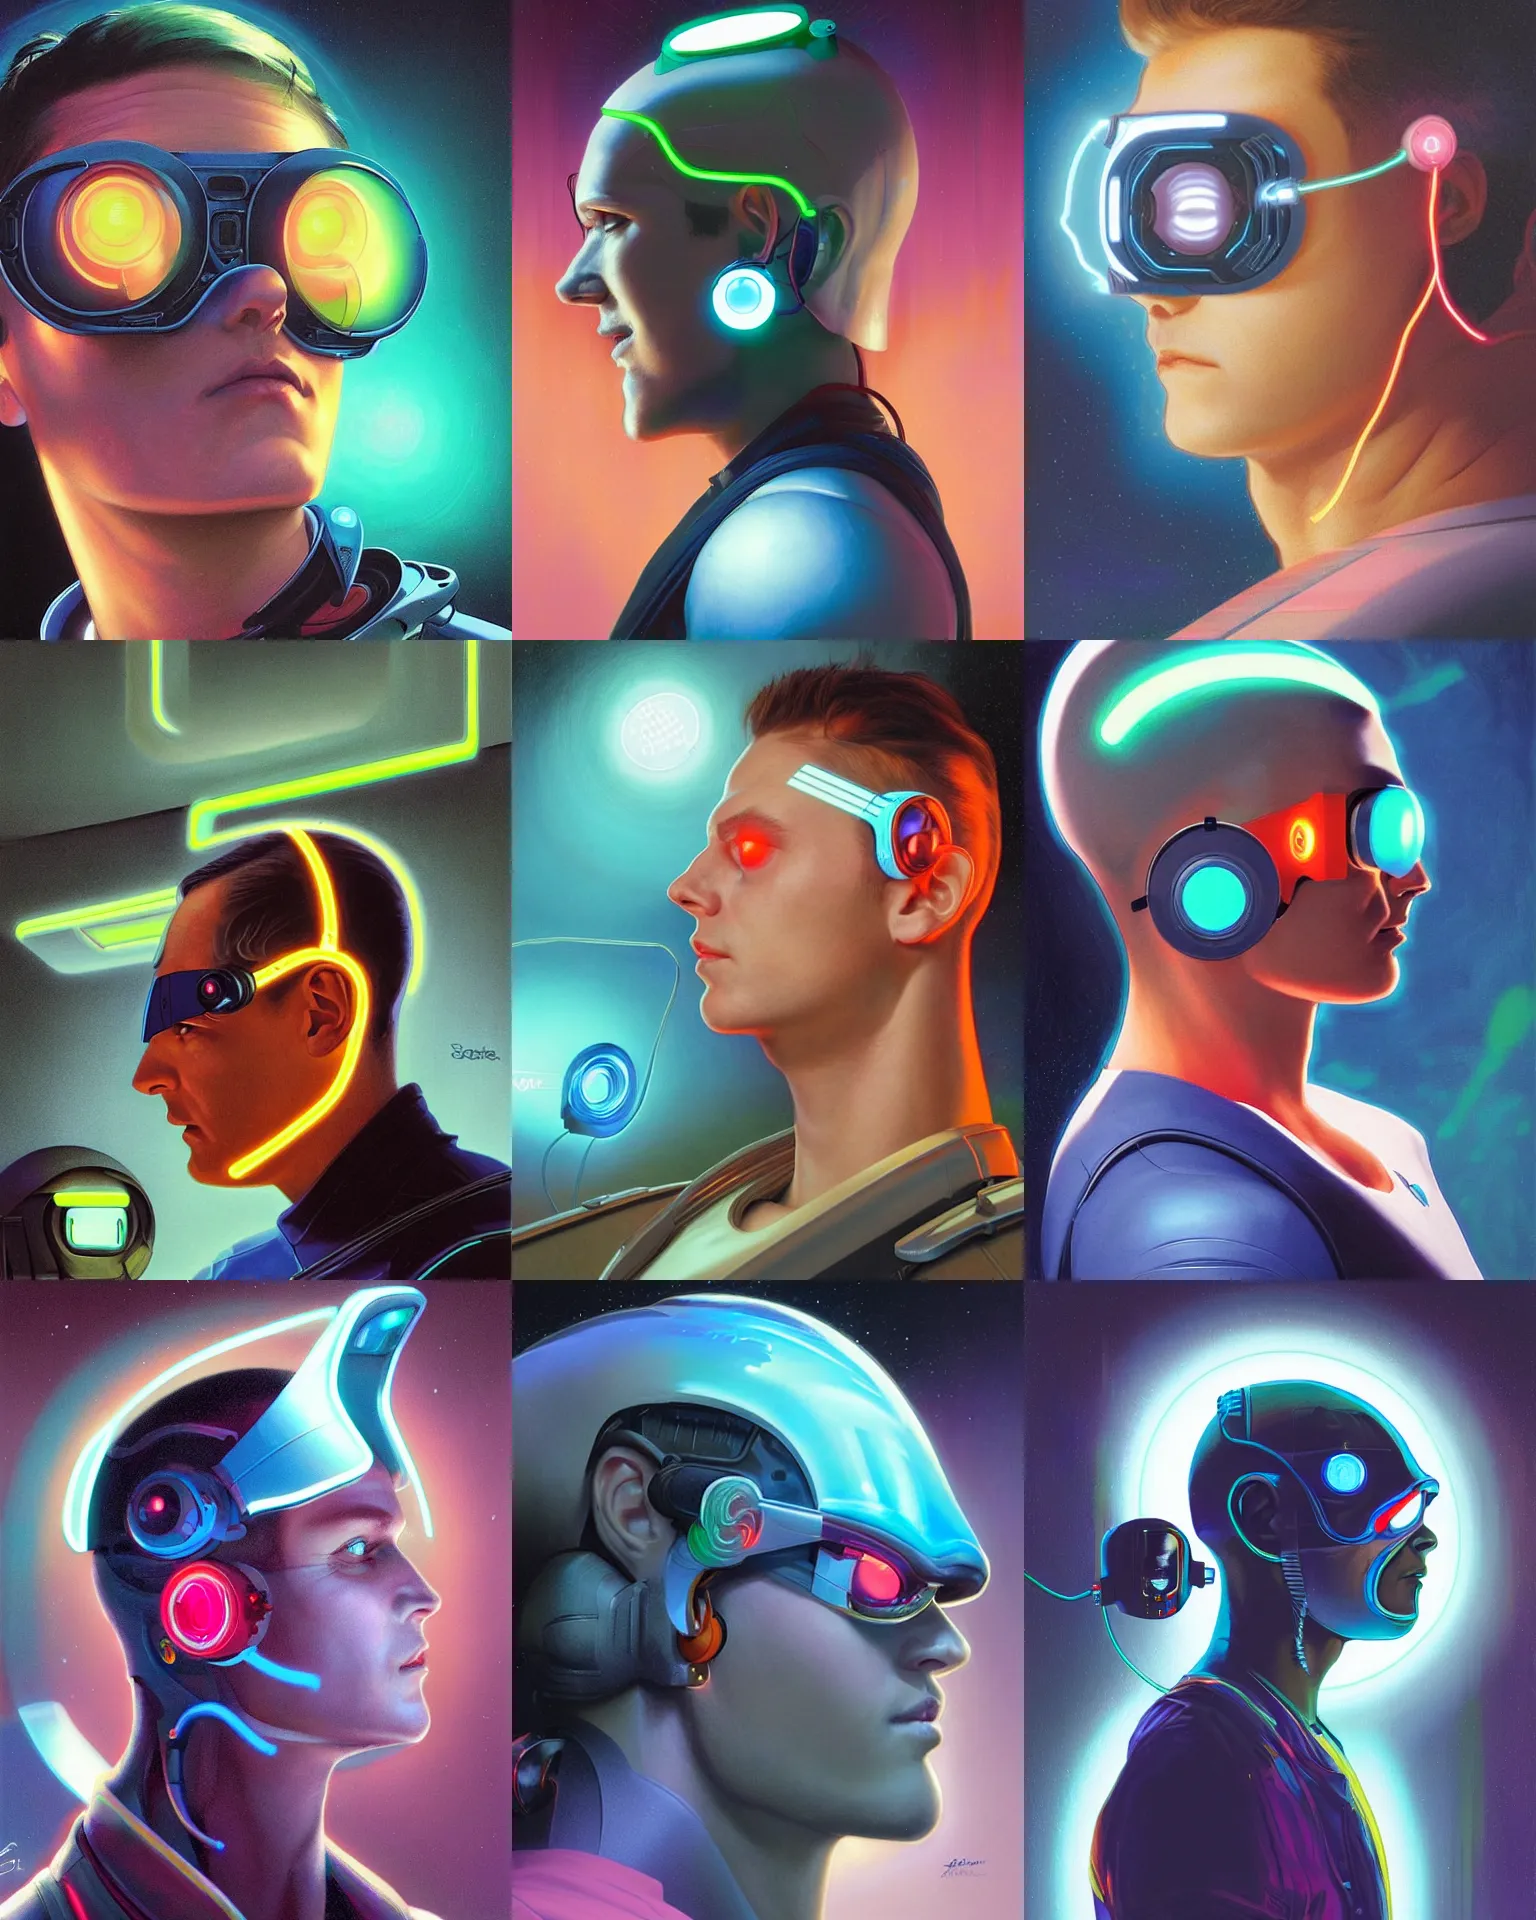 Prompt: side view future coder man, sleek cyclops display over eyes and glowing headset, neon accents, holographic colors, desaturated headshot portrait digital painting by donoto giancola, dean cornwall, rhads, john berkey, tom whalen, alex grey, alphonse mucha, astronaut cyberpunk electric lights profile